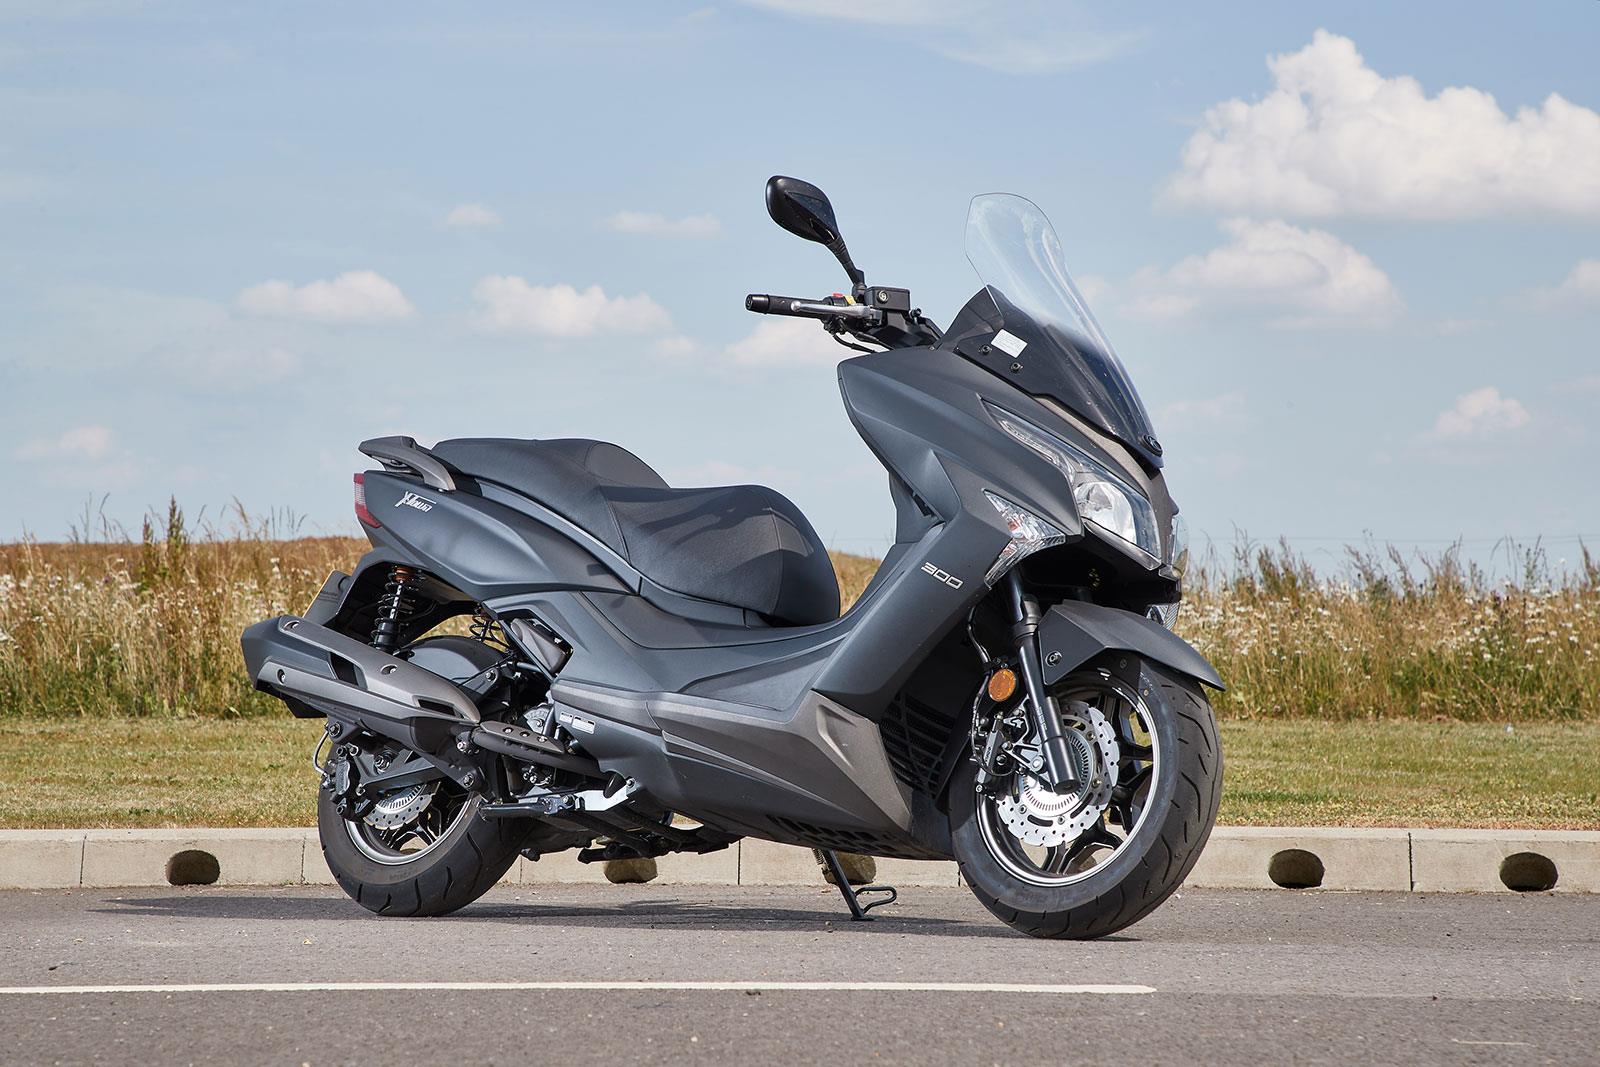 Kymco X Town 3001 Related Keywords & Suggestions - Kymco X T